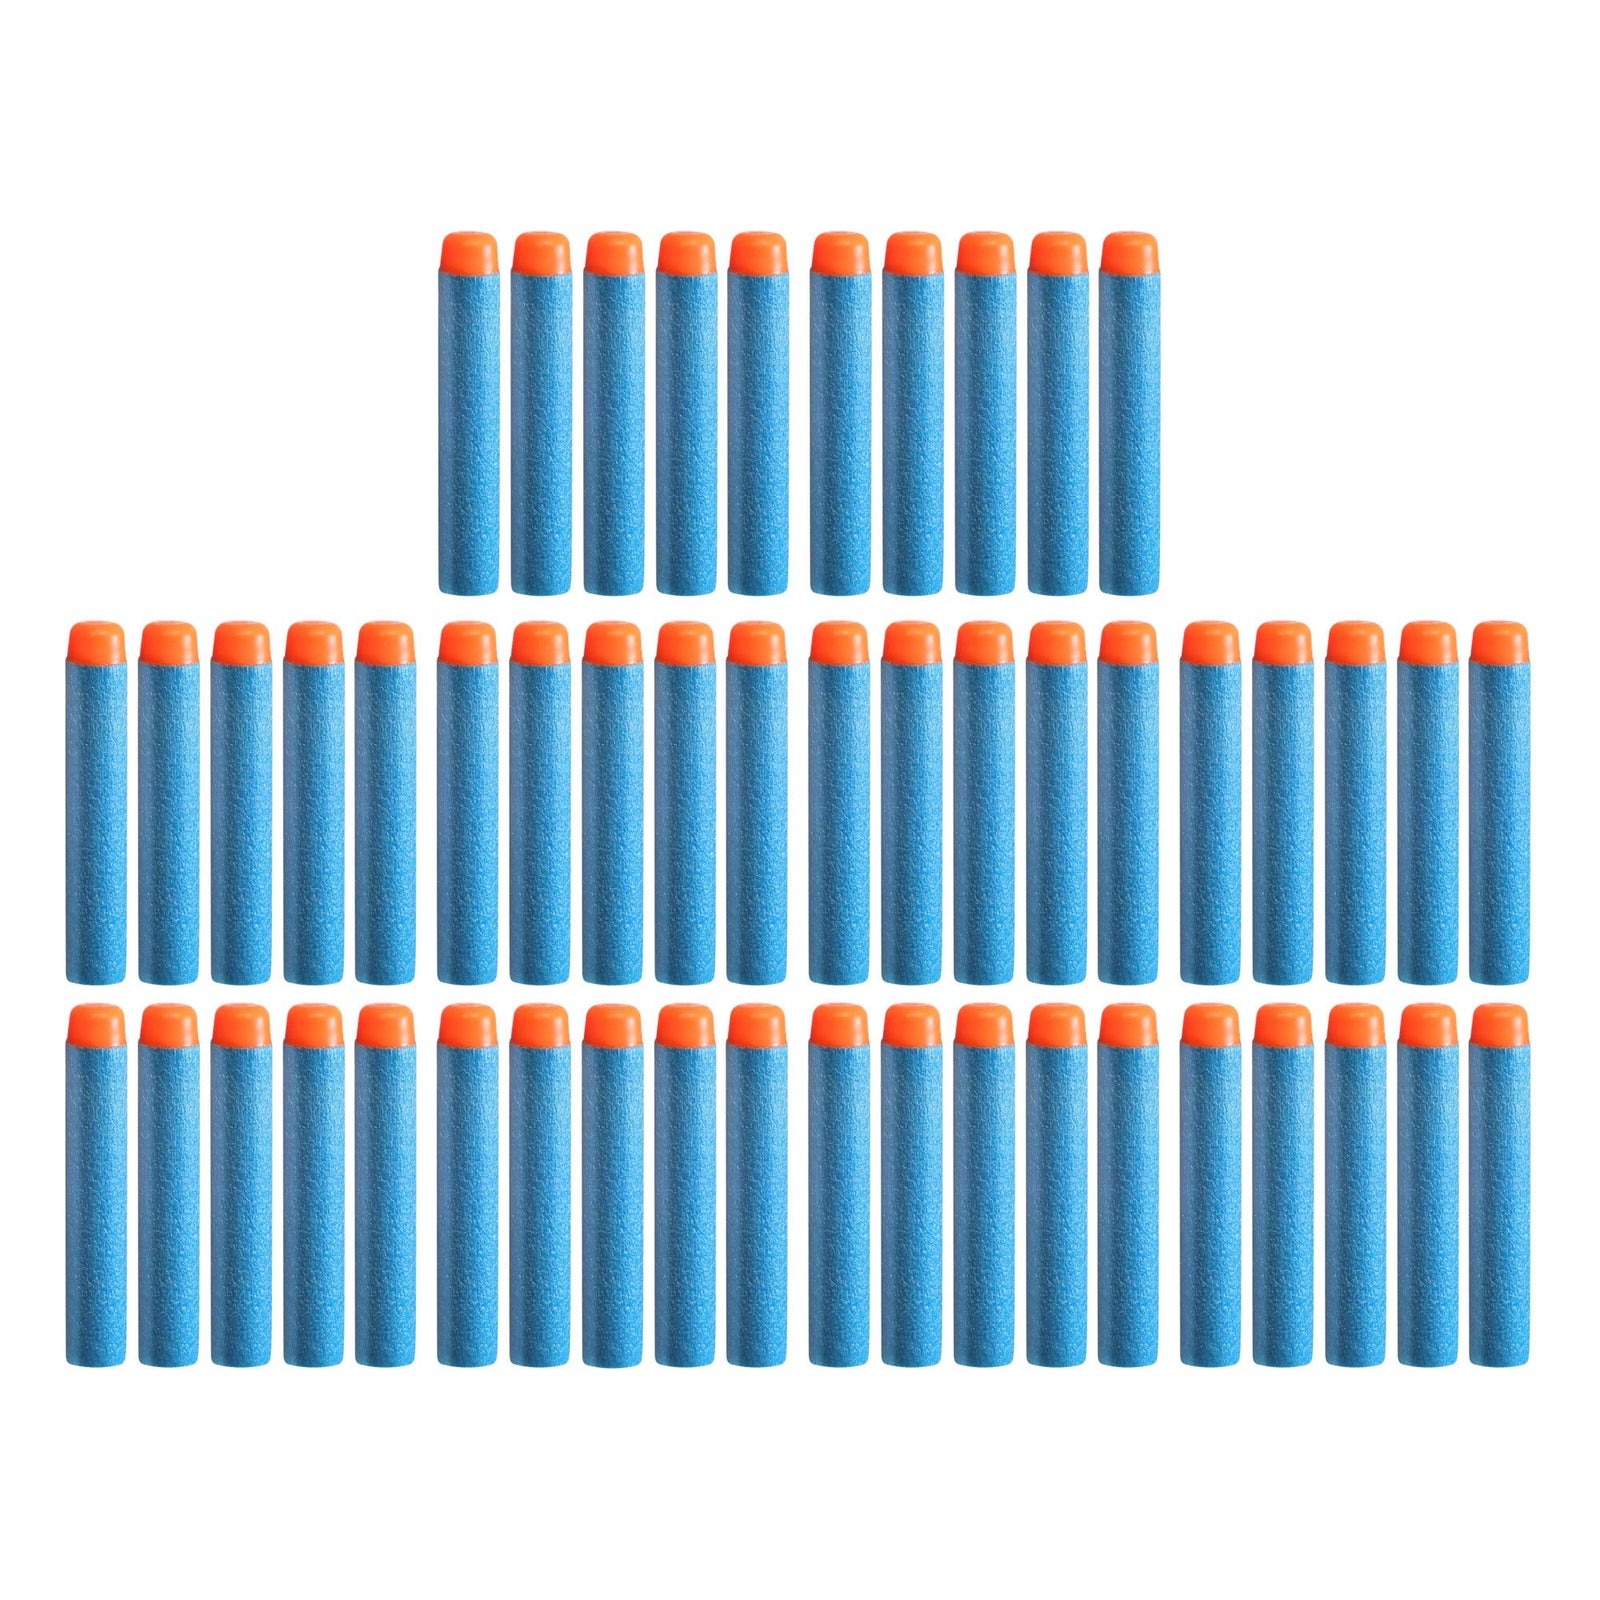 NERF Elite 2.0 50-Dart Refill Pack -- 50 Official Elite 2.0 Foam Darts -- Compatible with All Blasters That Use Elite Darts